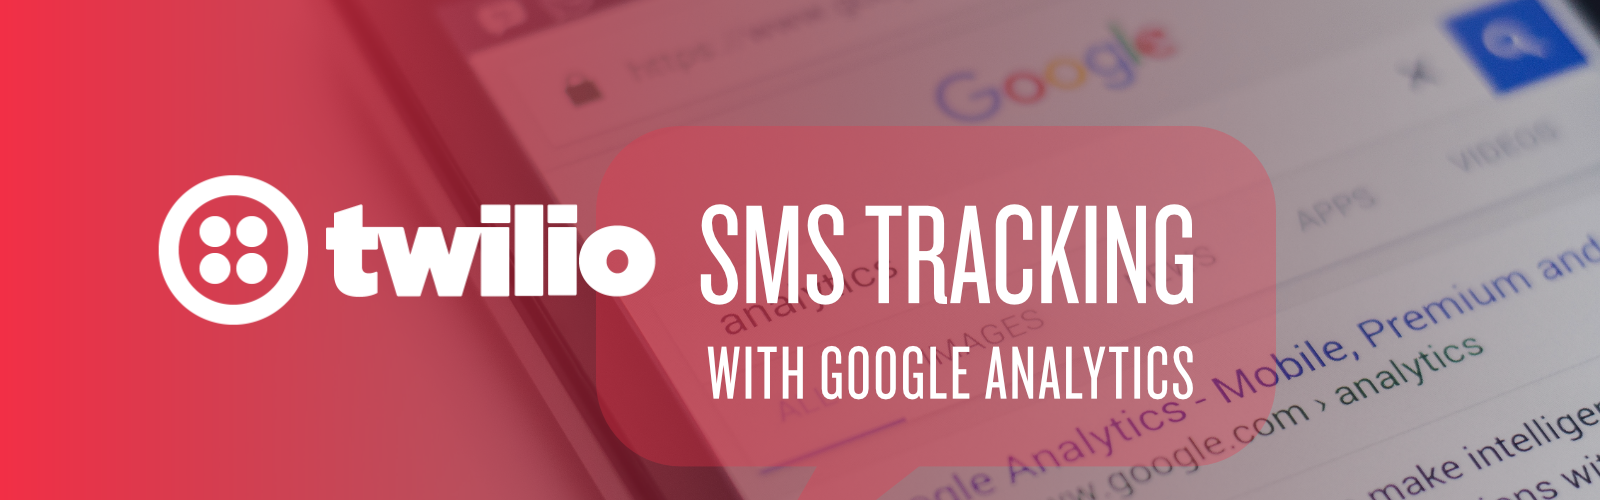 twilio-sms-tracking-google-analytics-cover-photo.png